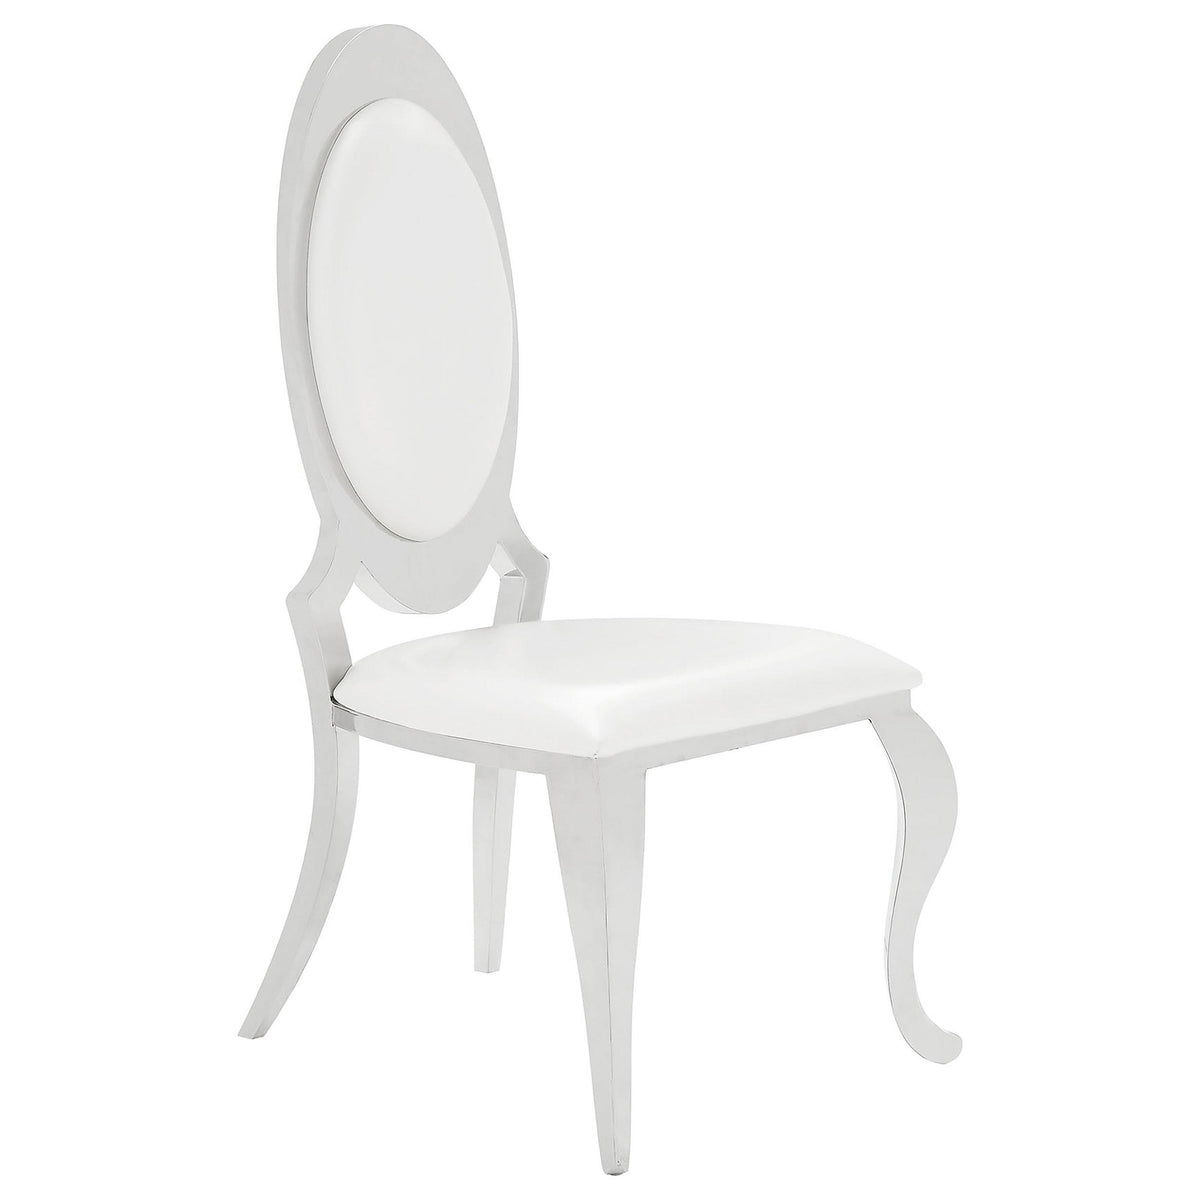 Anchorage Oval Back Side Chairs Cream and Chrome (Set of 2) Anchorage Oval Back Side Chairs Cream and Chrome (Set of 2) Half Price Furniture